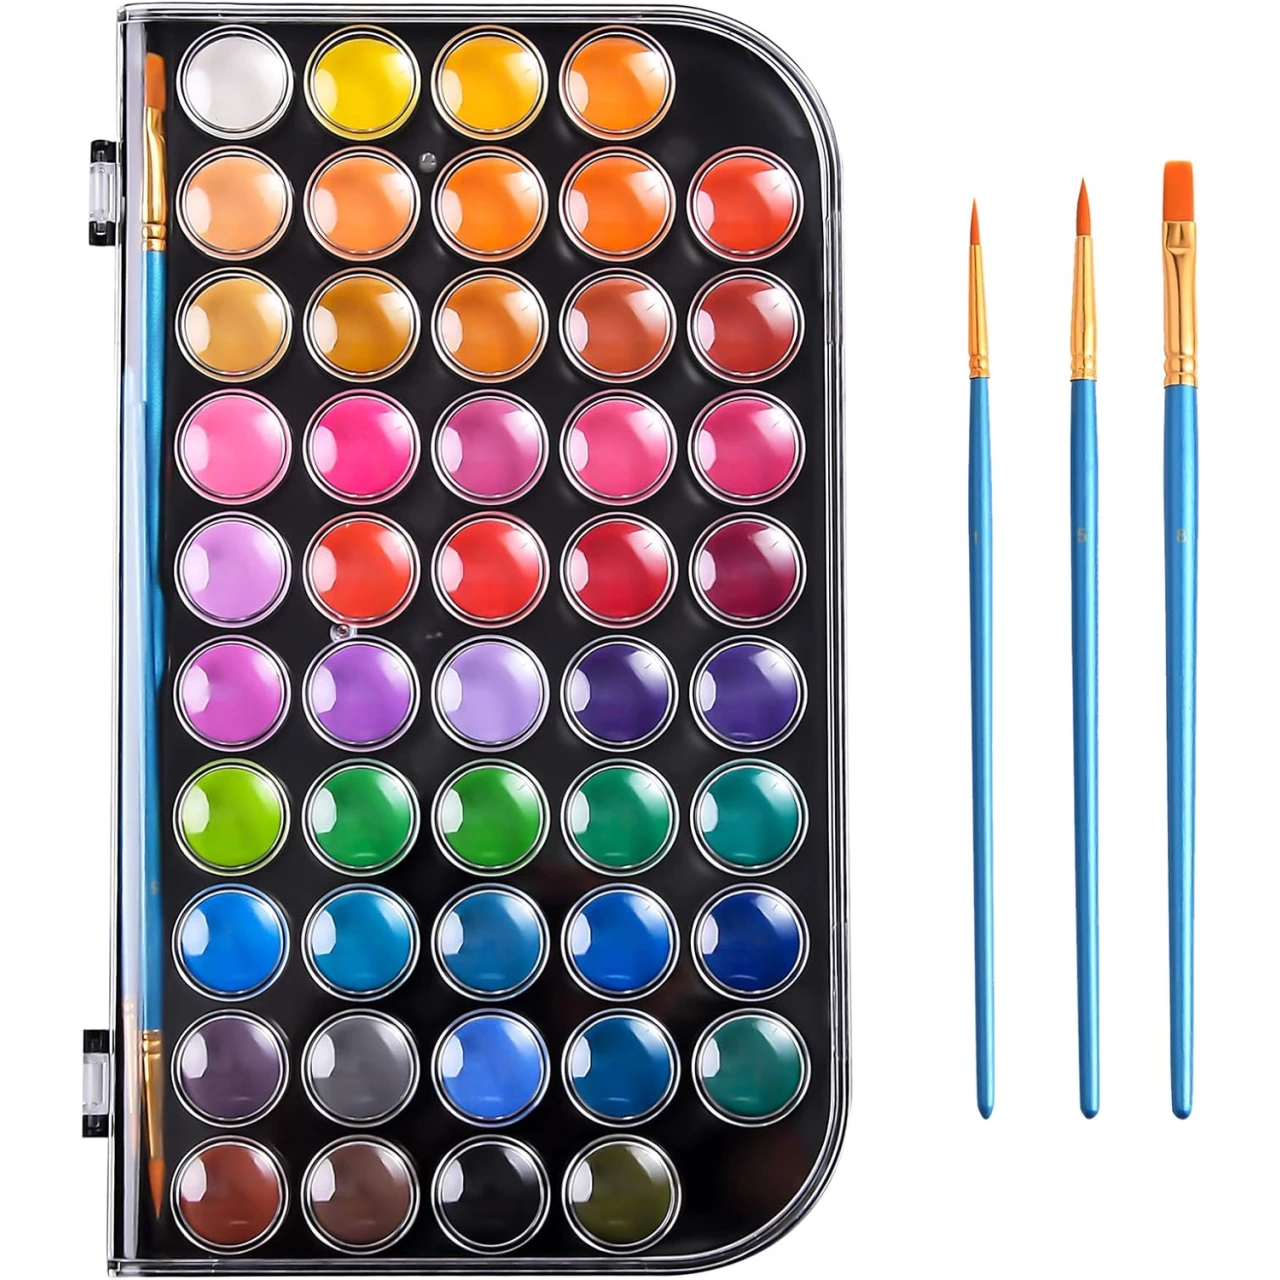 Upgraded 48 Colors Watercolor Paint Set